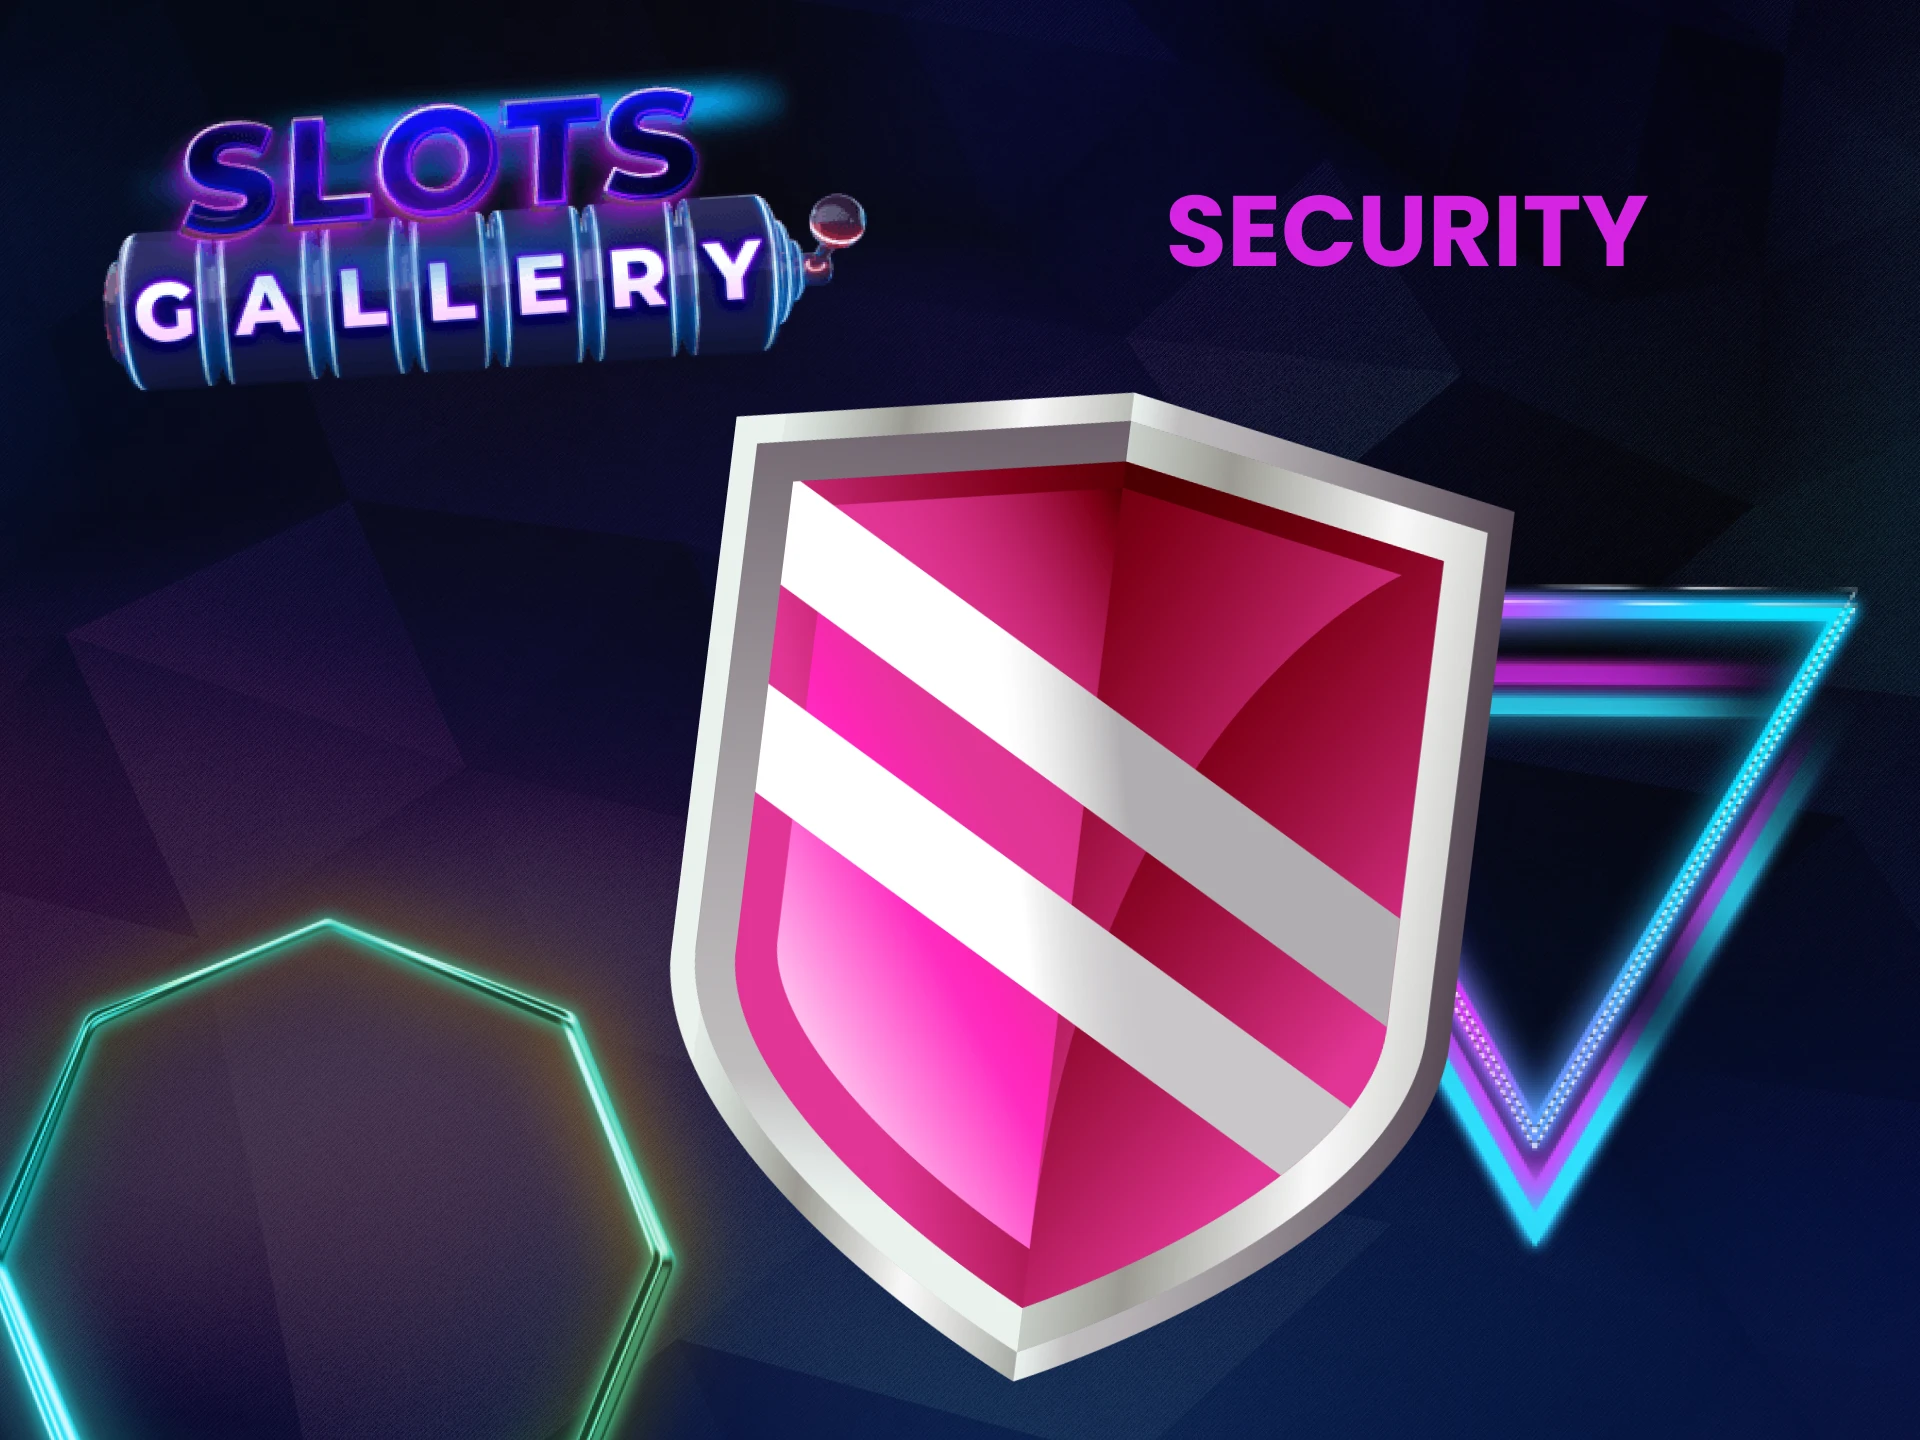 Slots Gallery is a safe and trusted site.